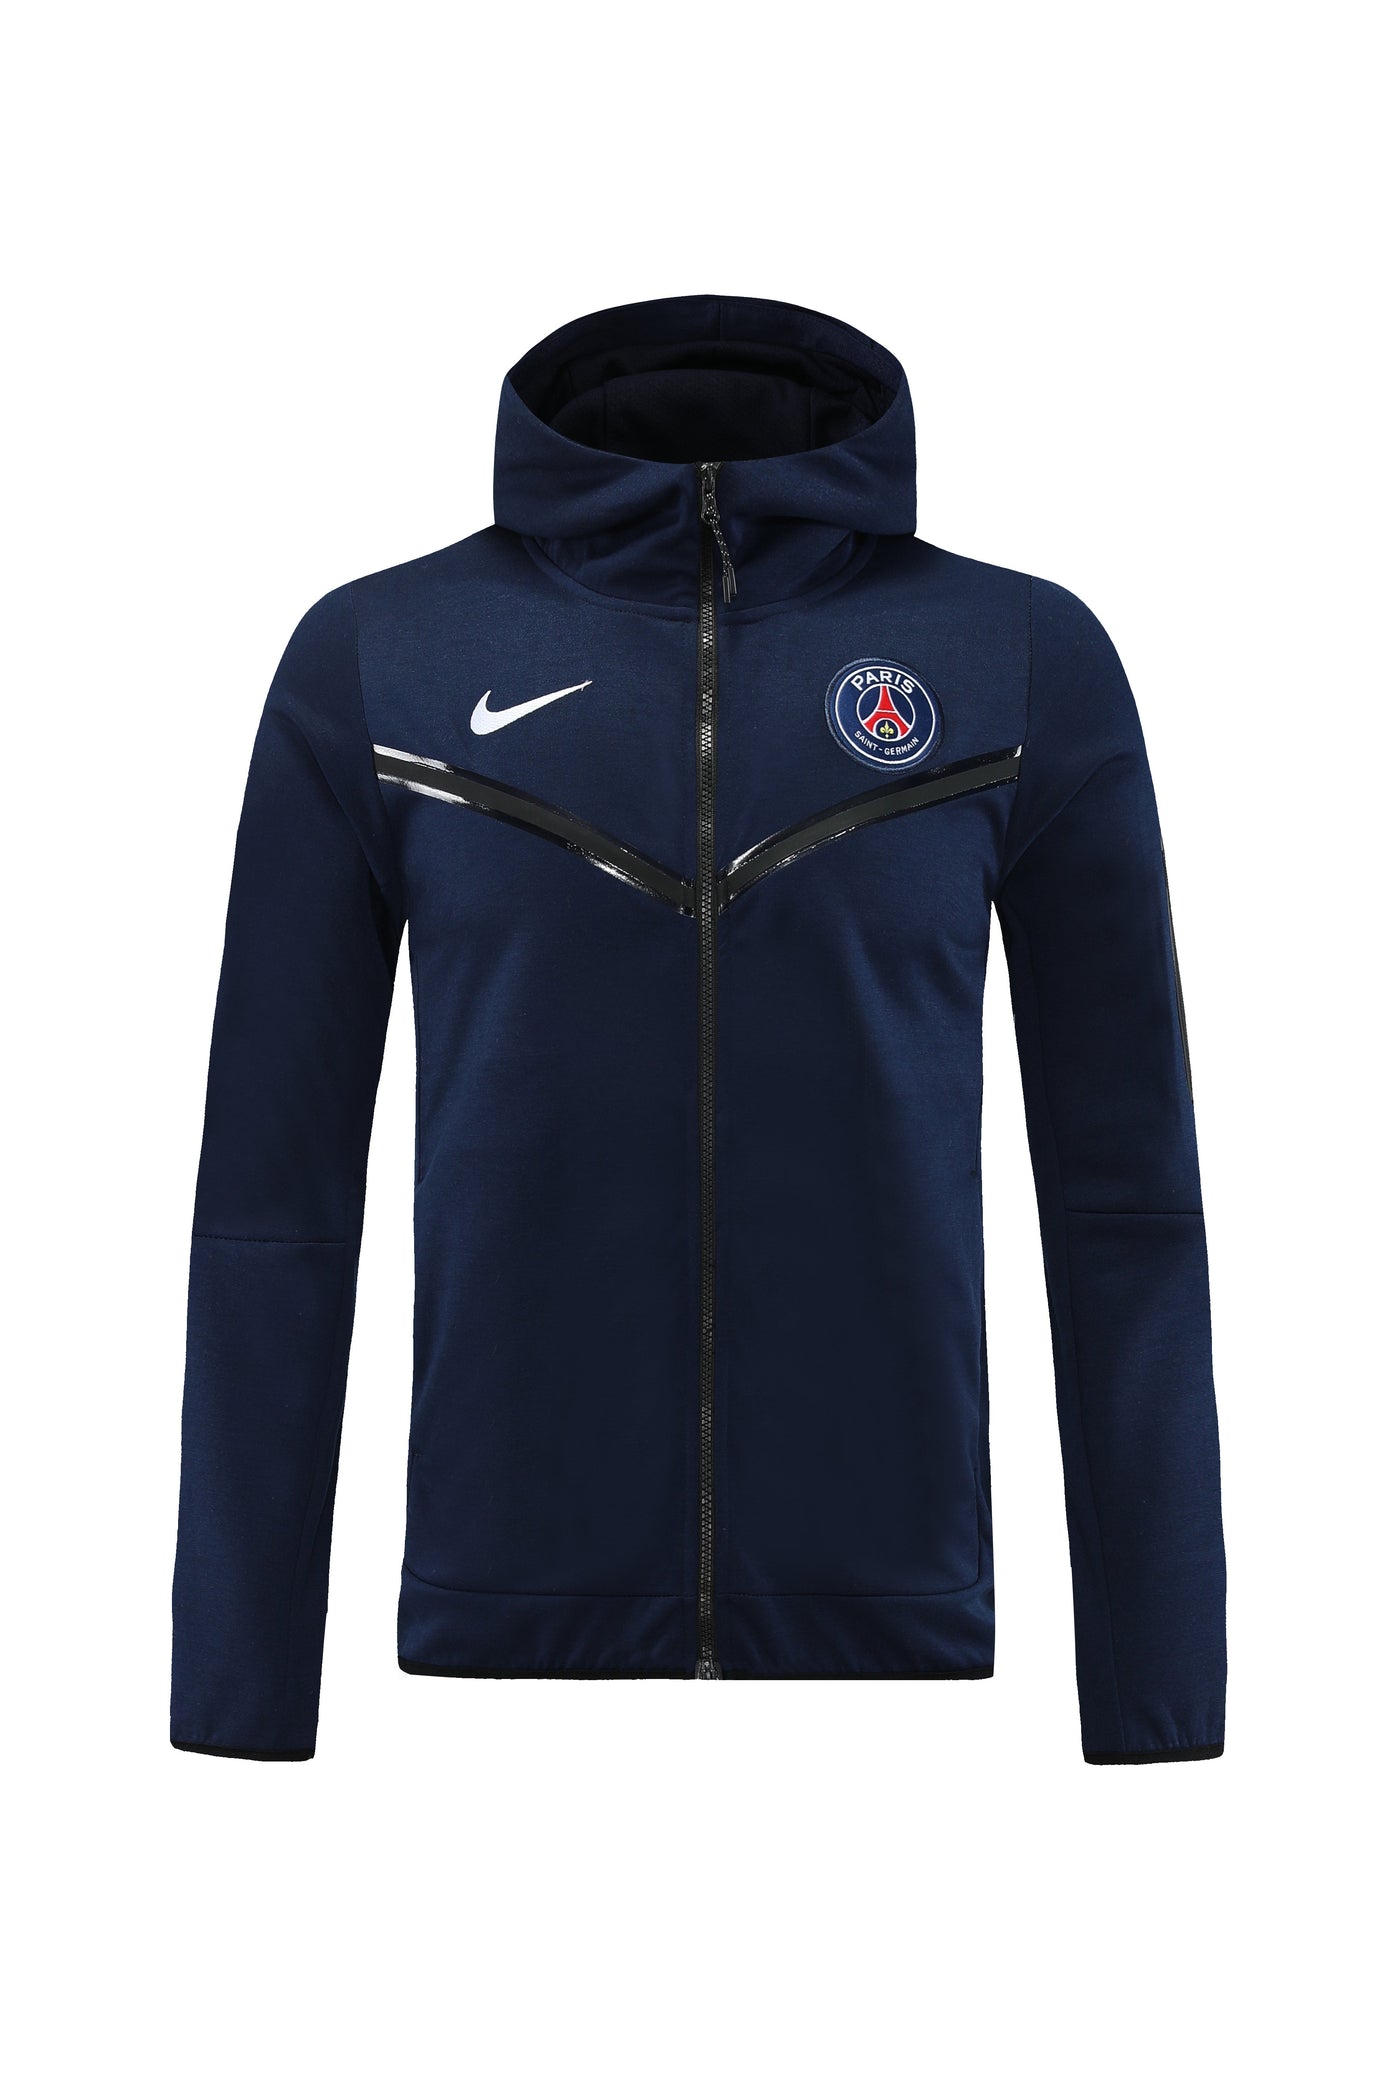 PSG Hooded Tracksuit